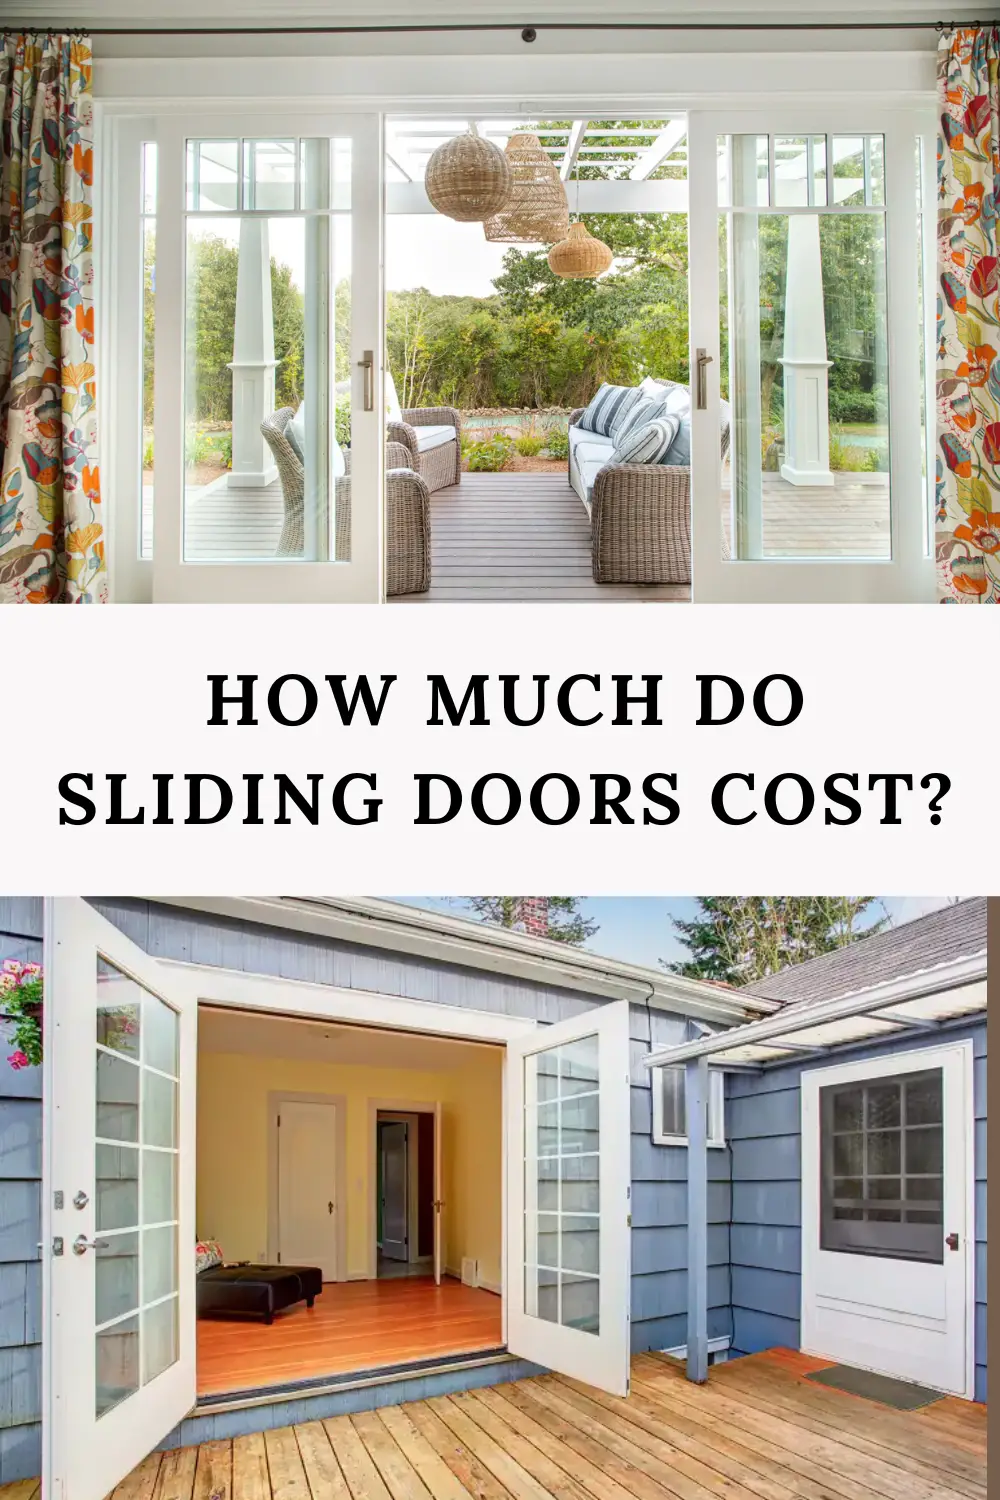 How much do Sliding Doors Cost?